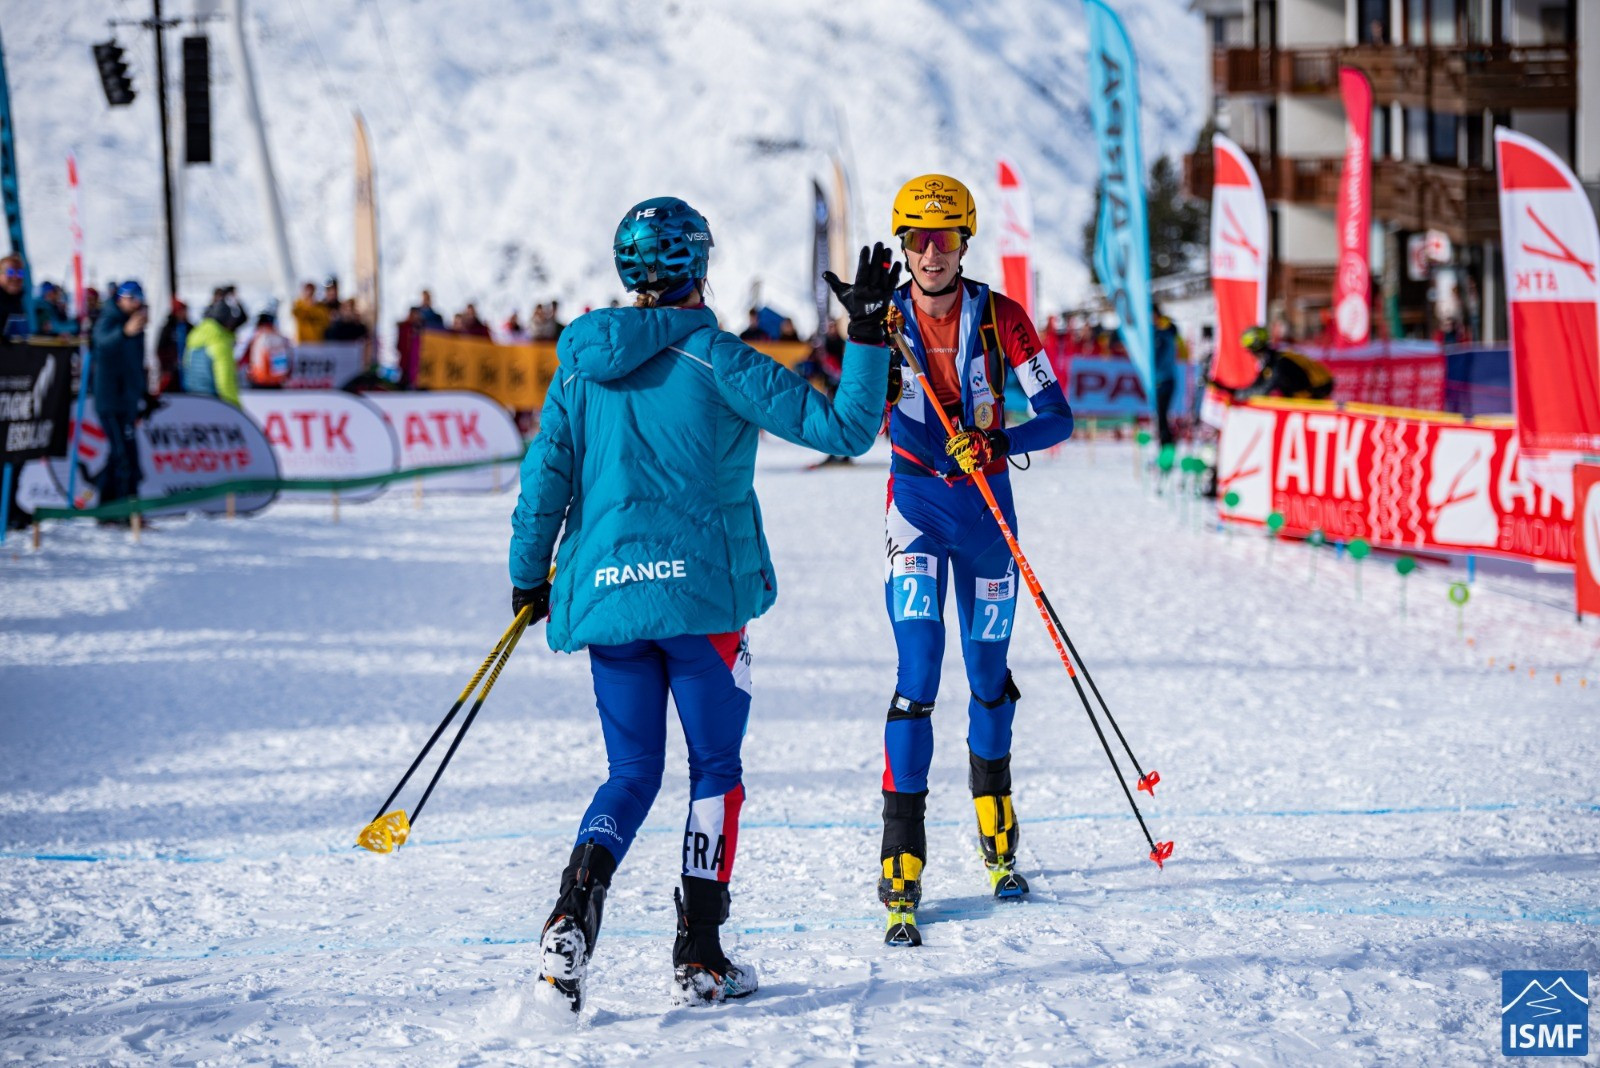 Emily Harrop and Thibault Anselmet triumphed in the mixed relay in Val Thorens ©ISMF